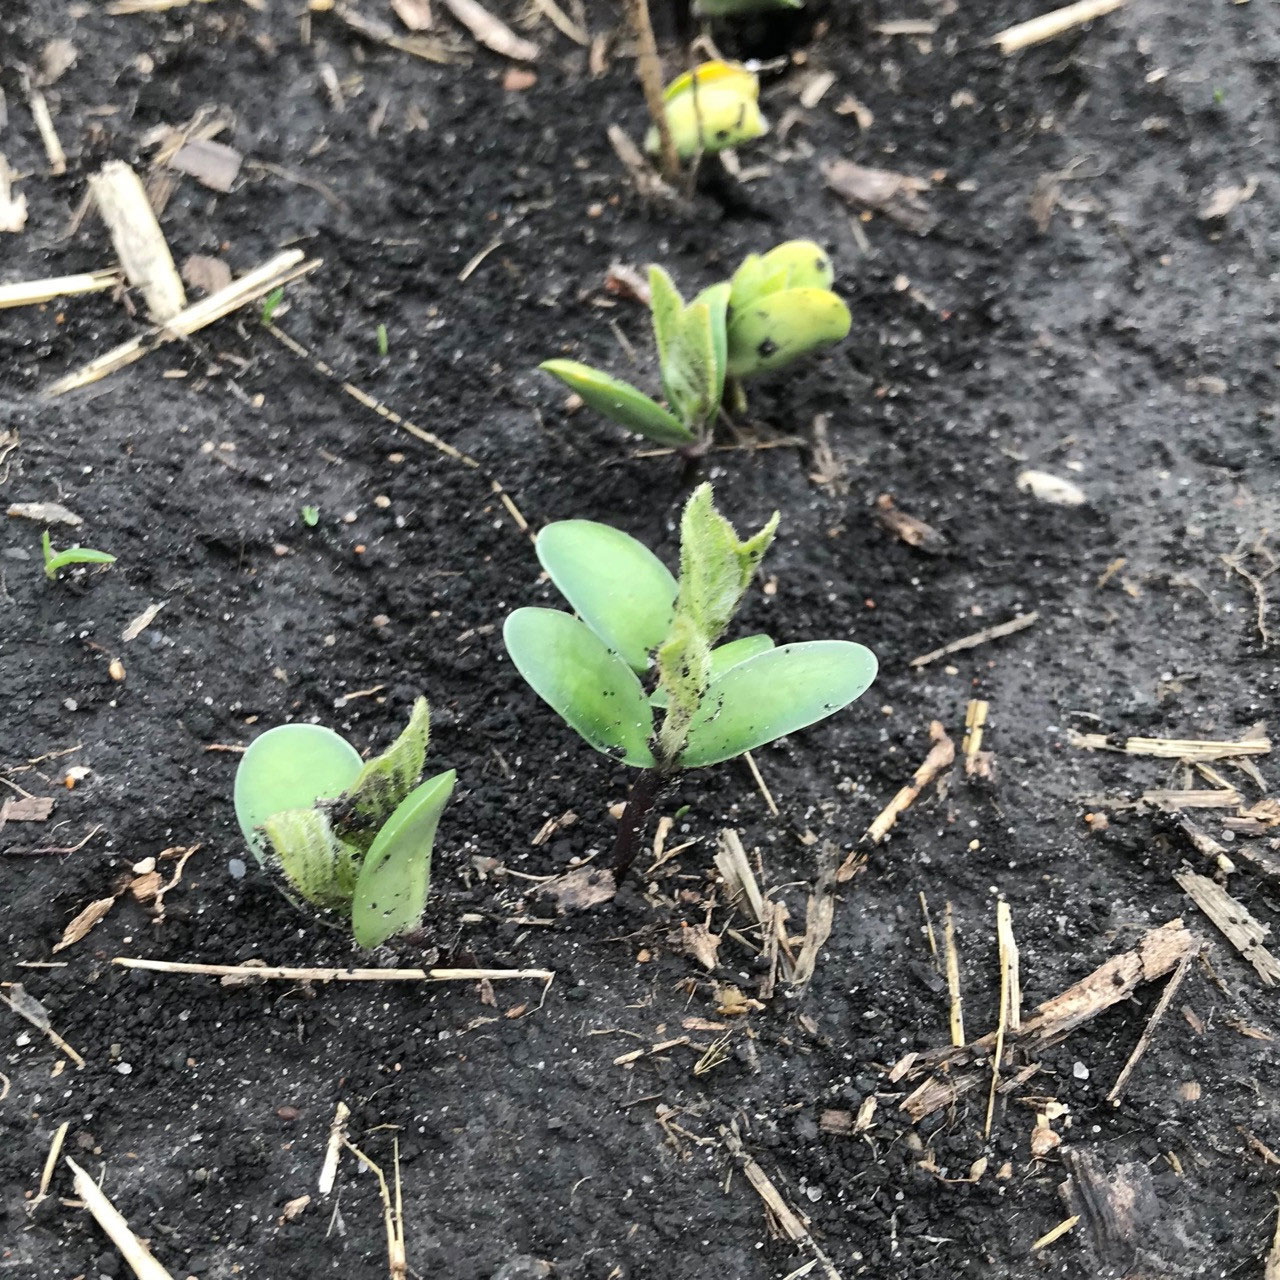 A closeup of a few Laura Soybean plants sprouting. Most plants have only 4 leaves showing.